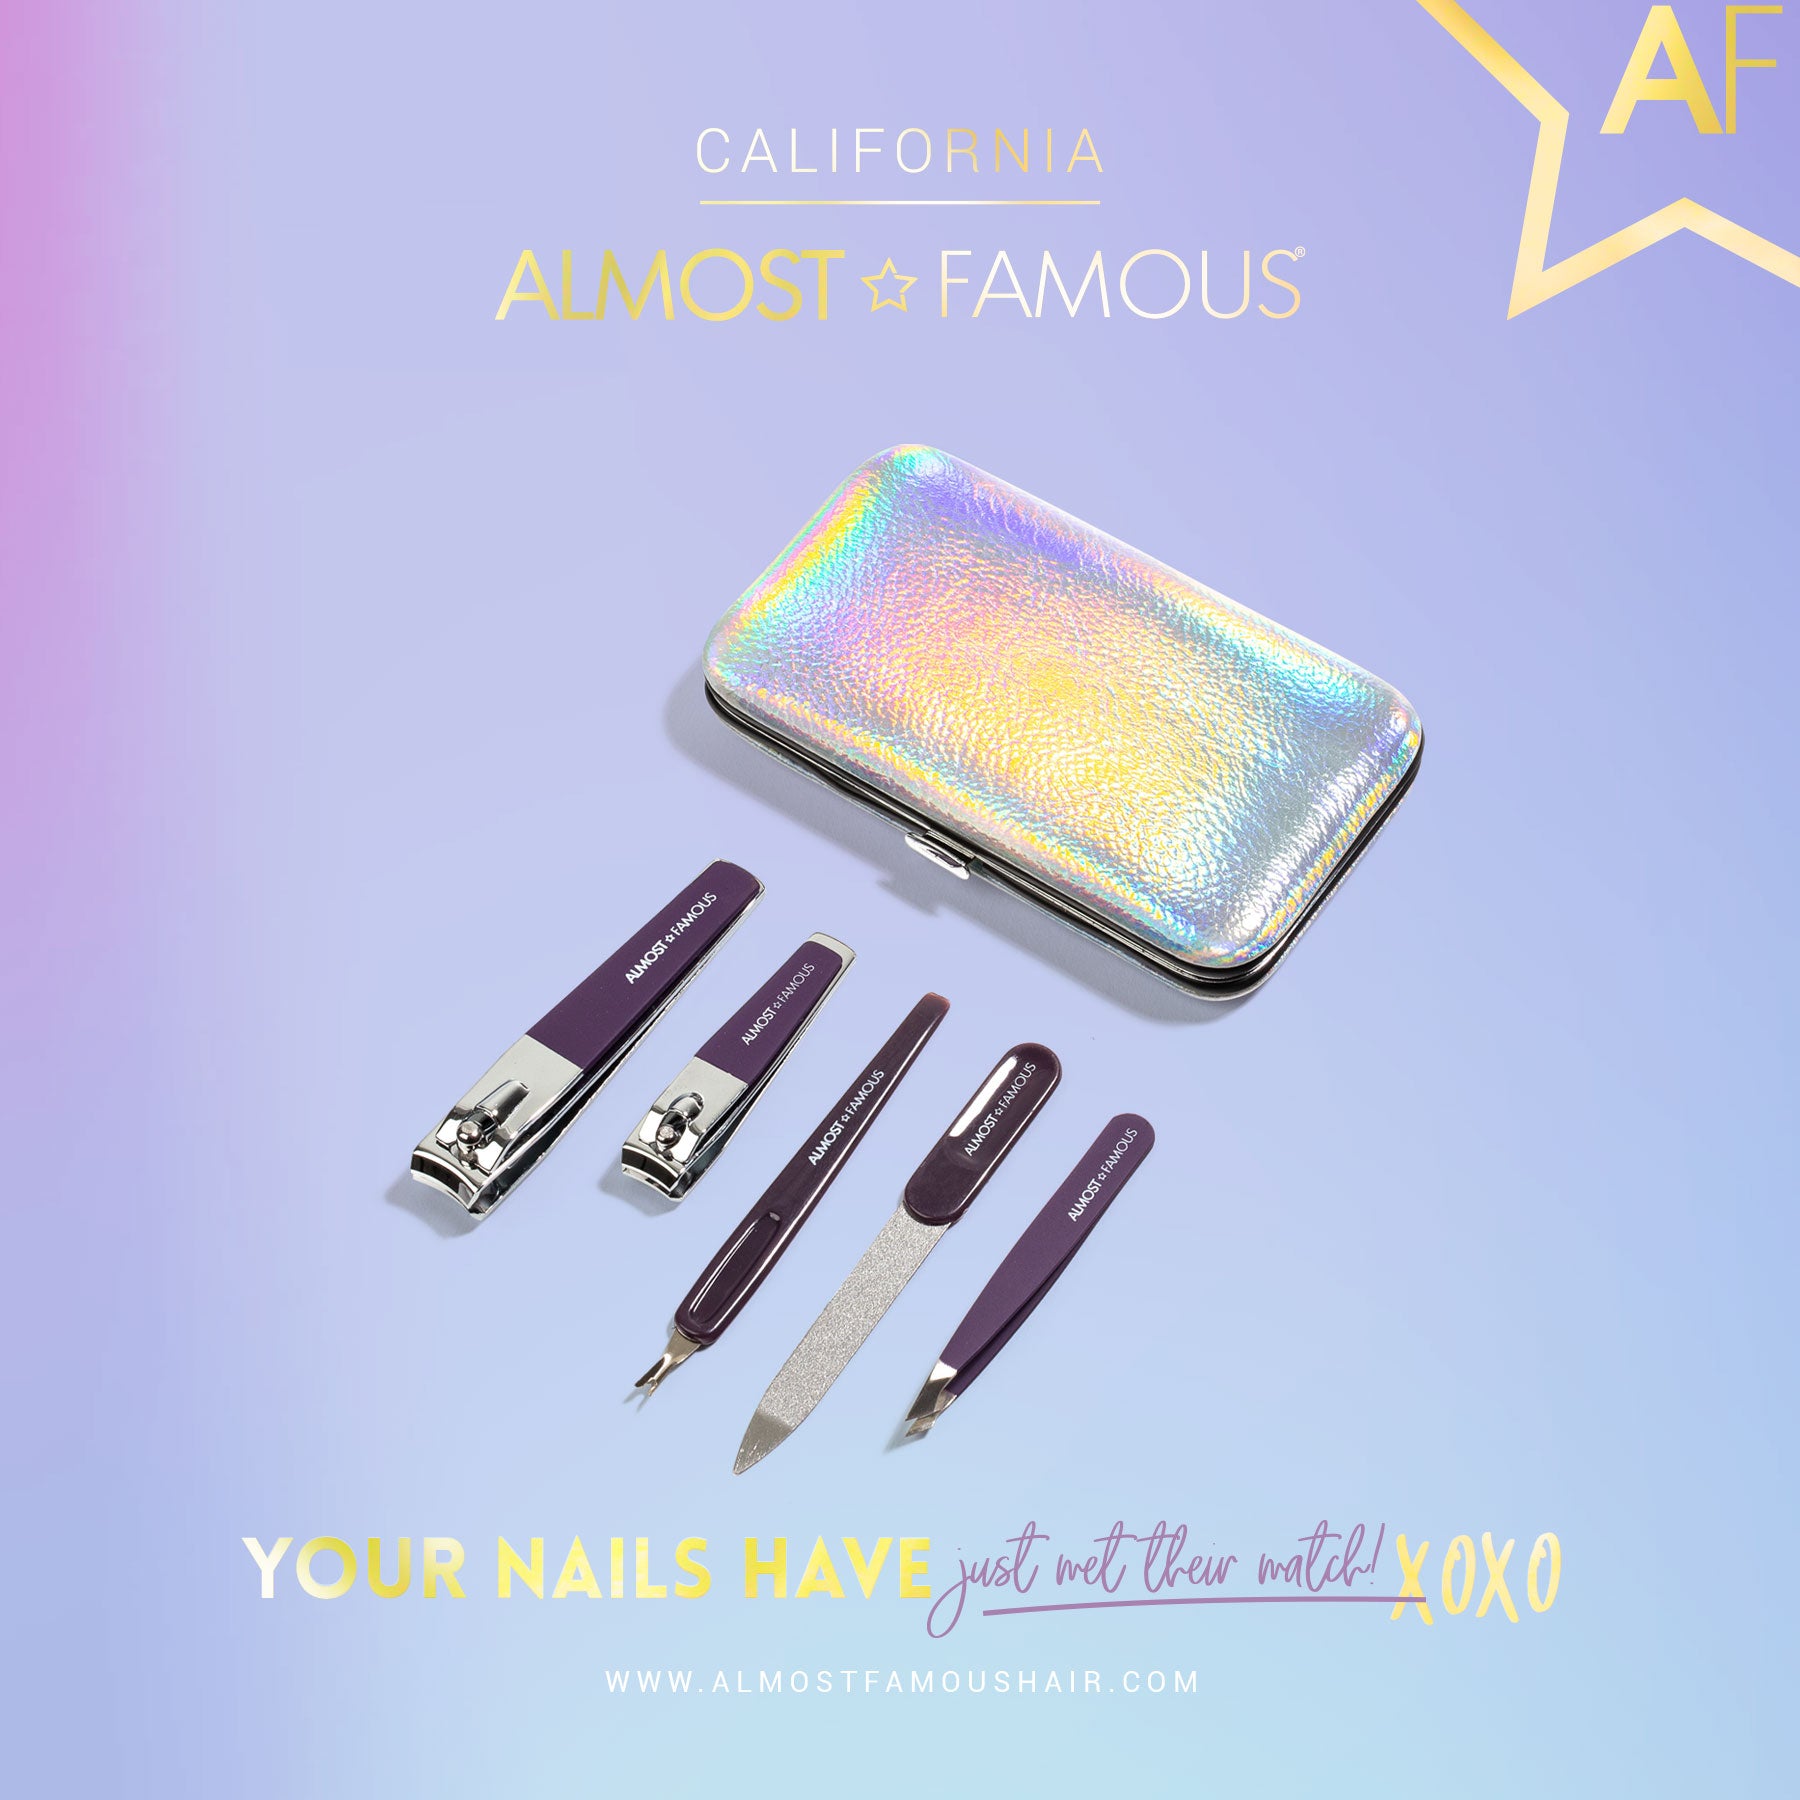 Nail Manicure Kit With Travel Case